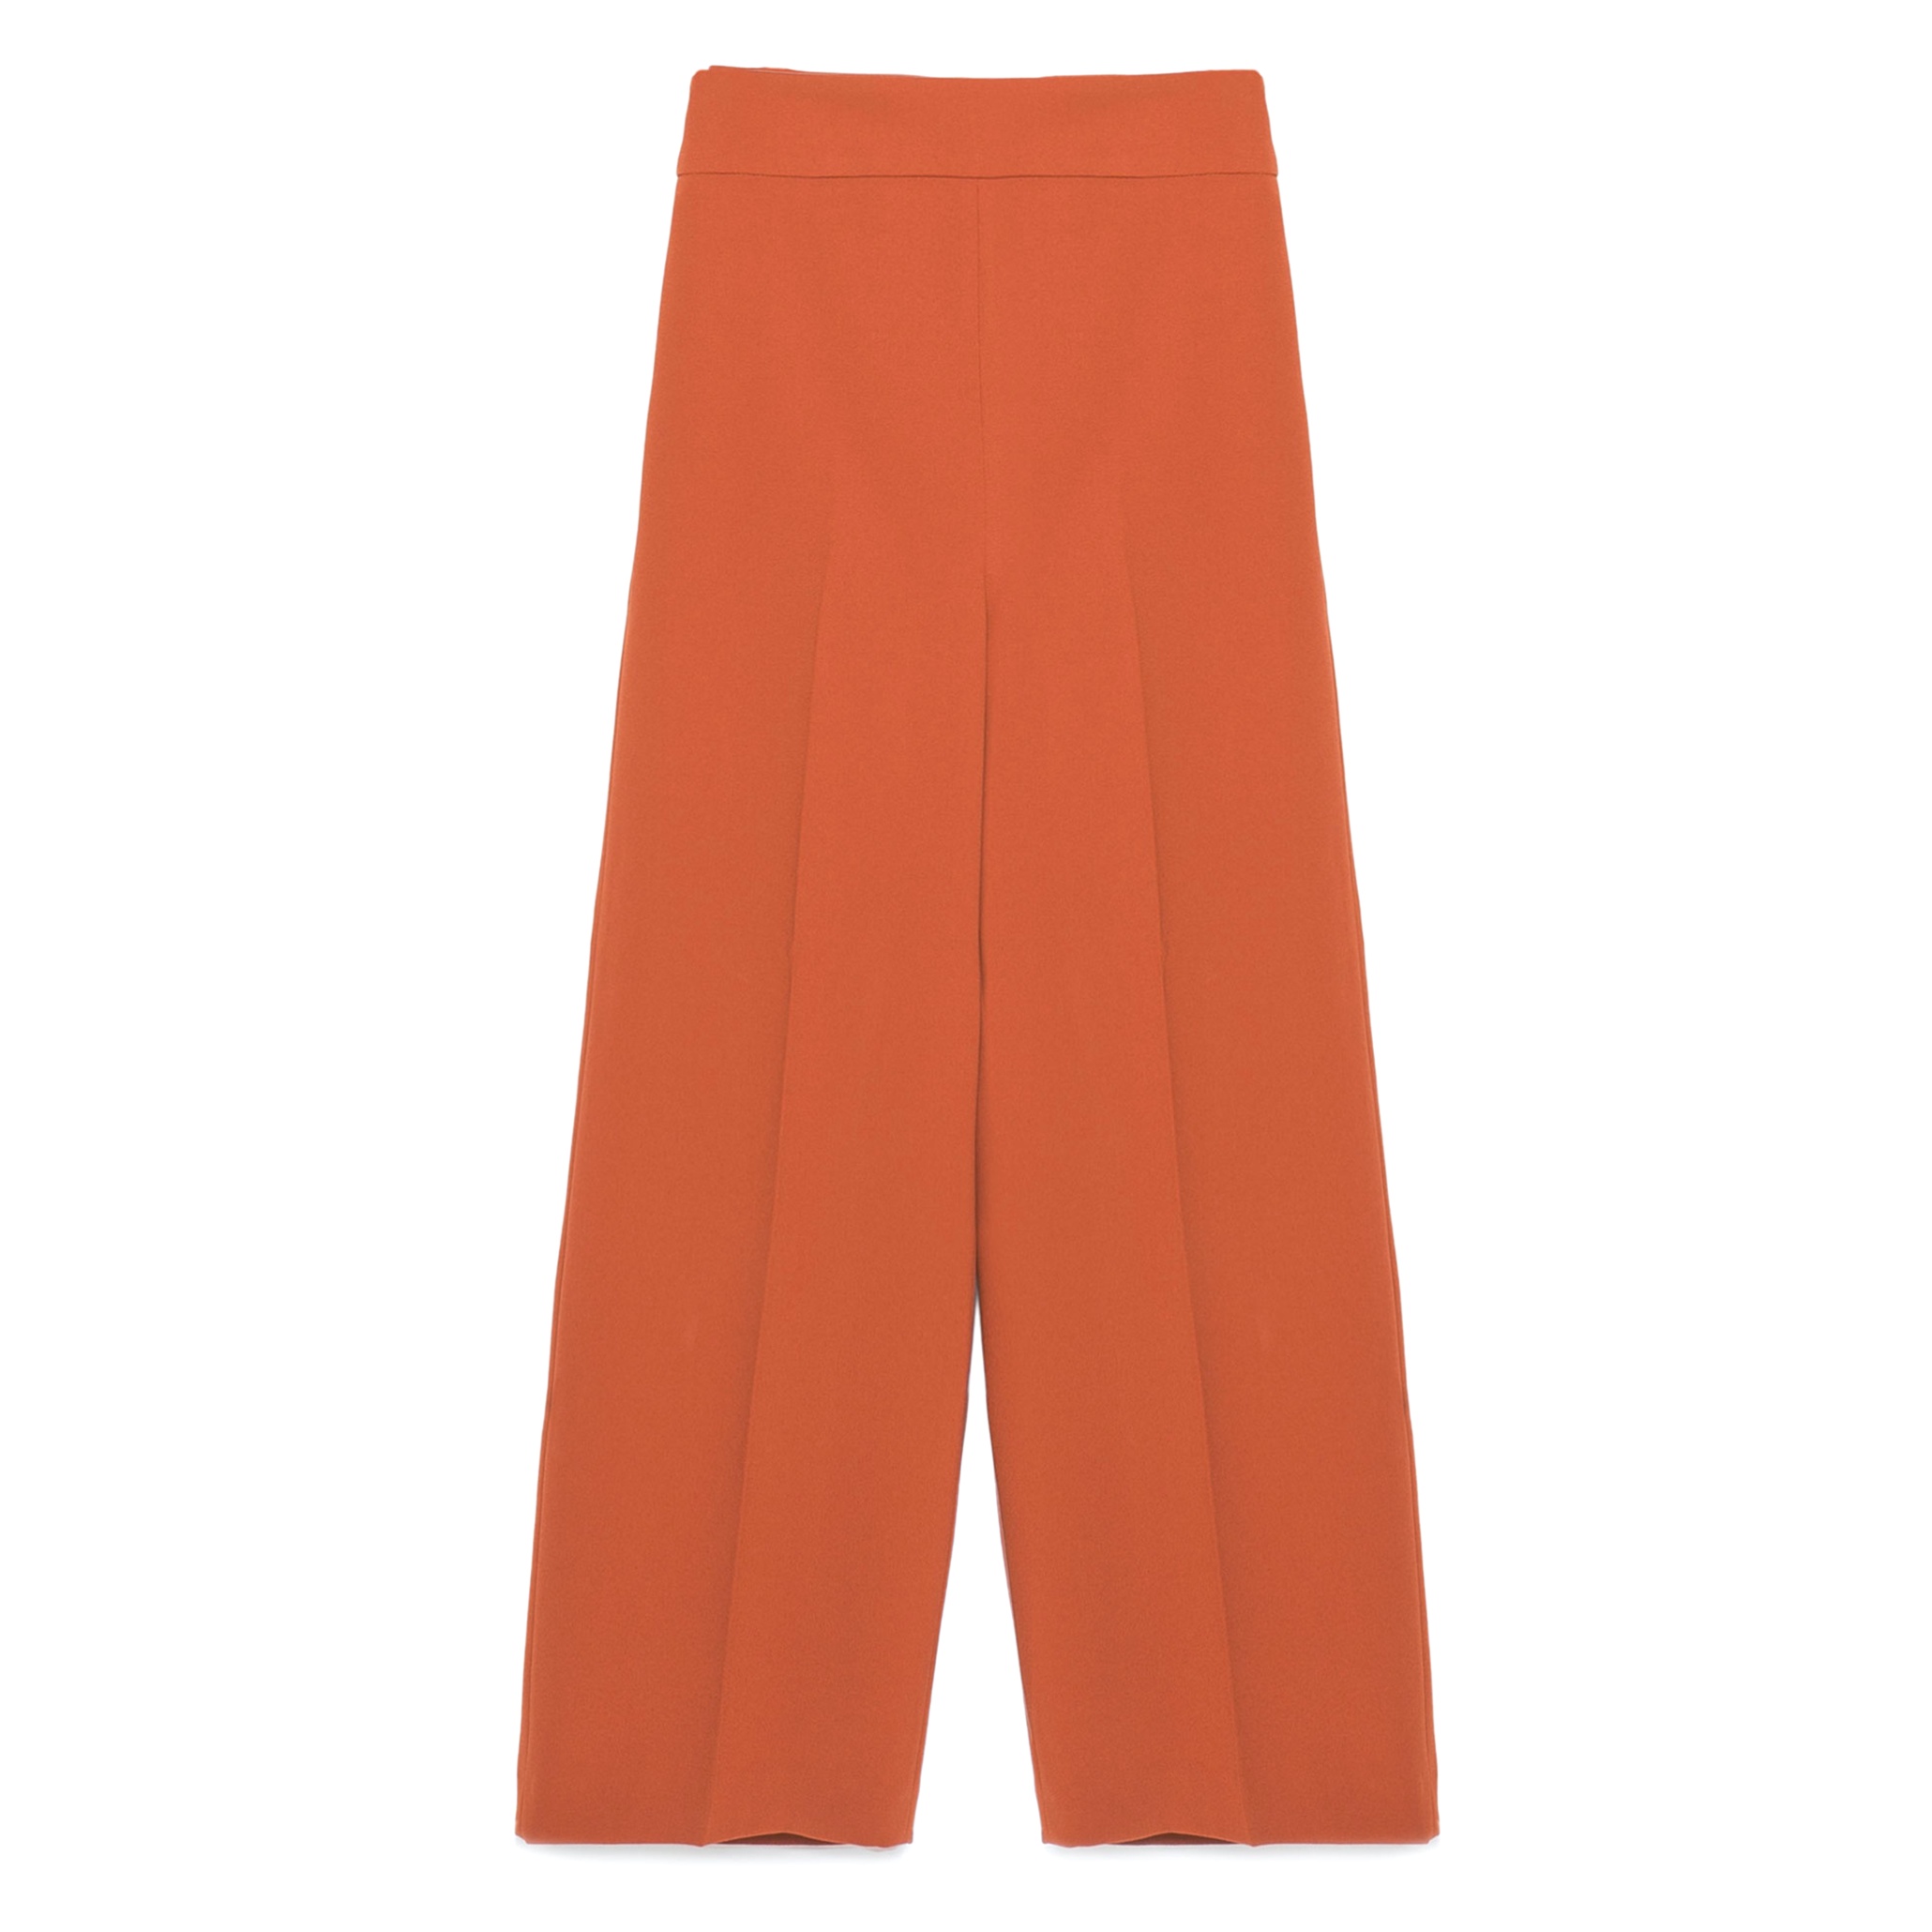 Great strides: 10 of the best spring culottes | Fashion | The Guardian